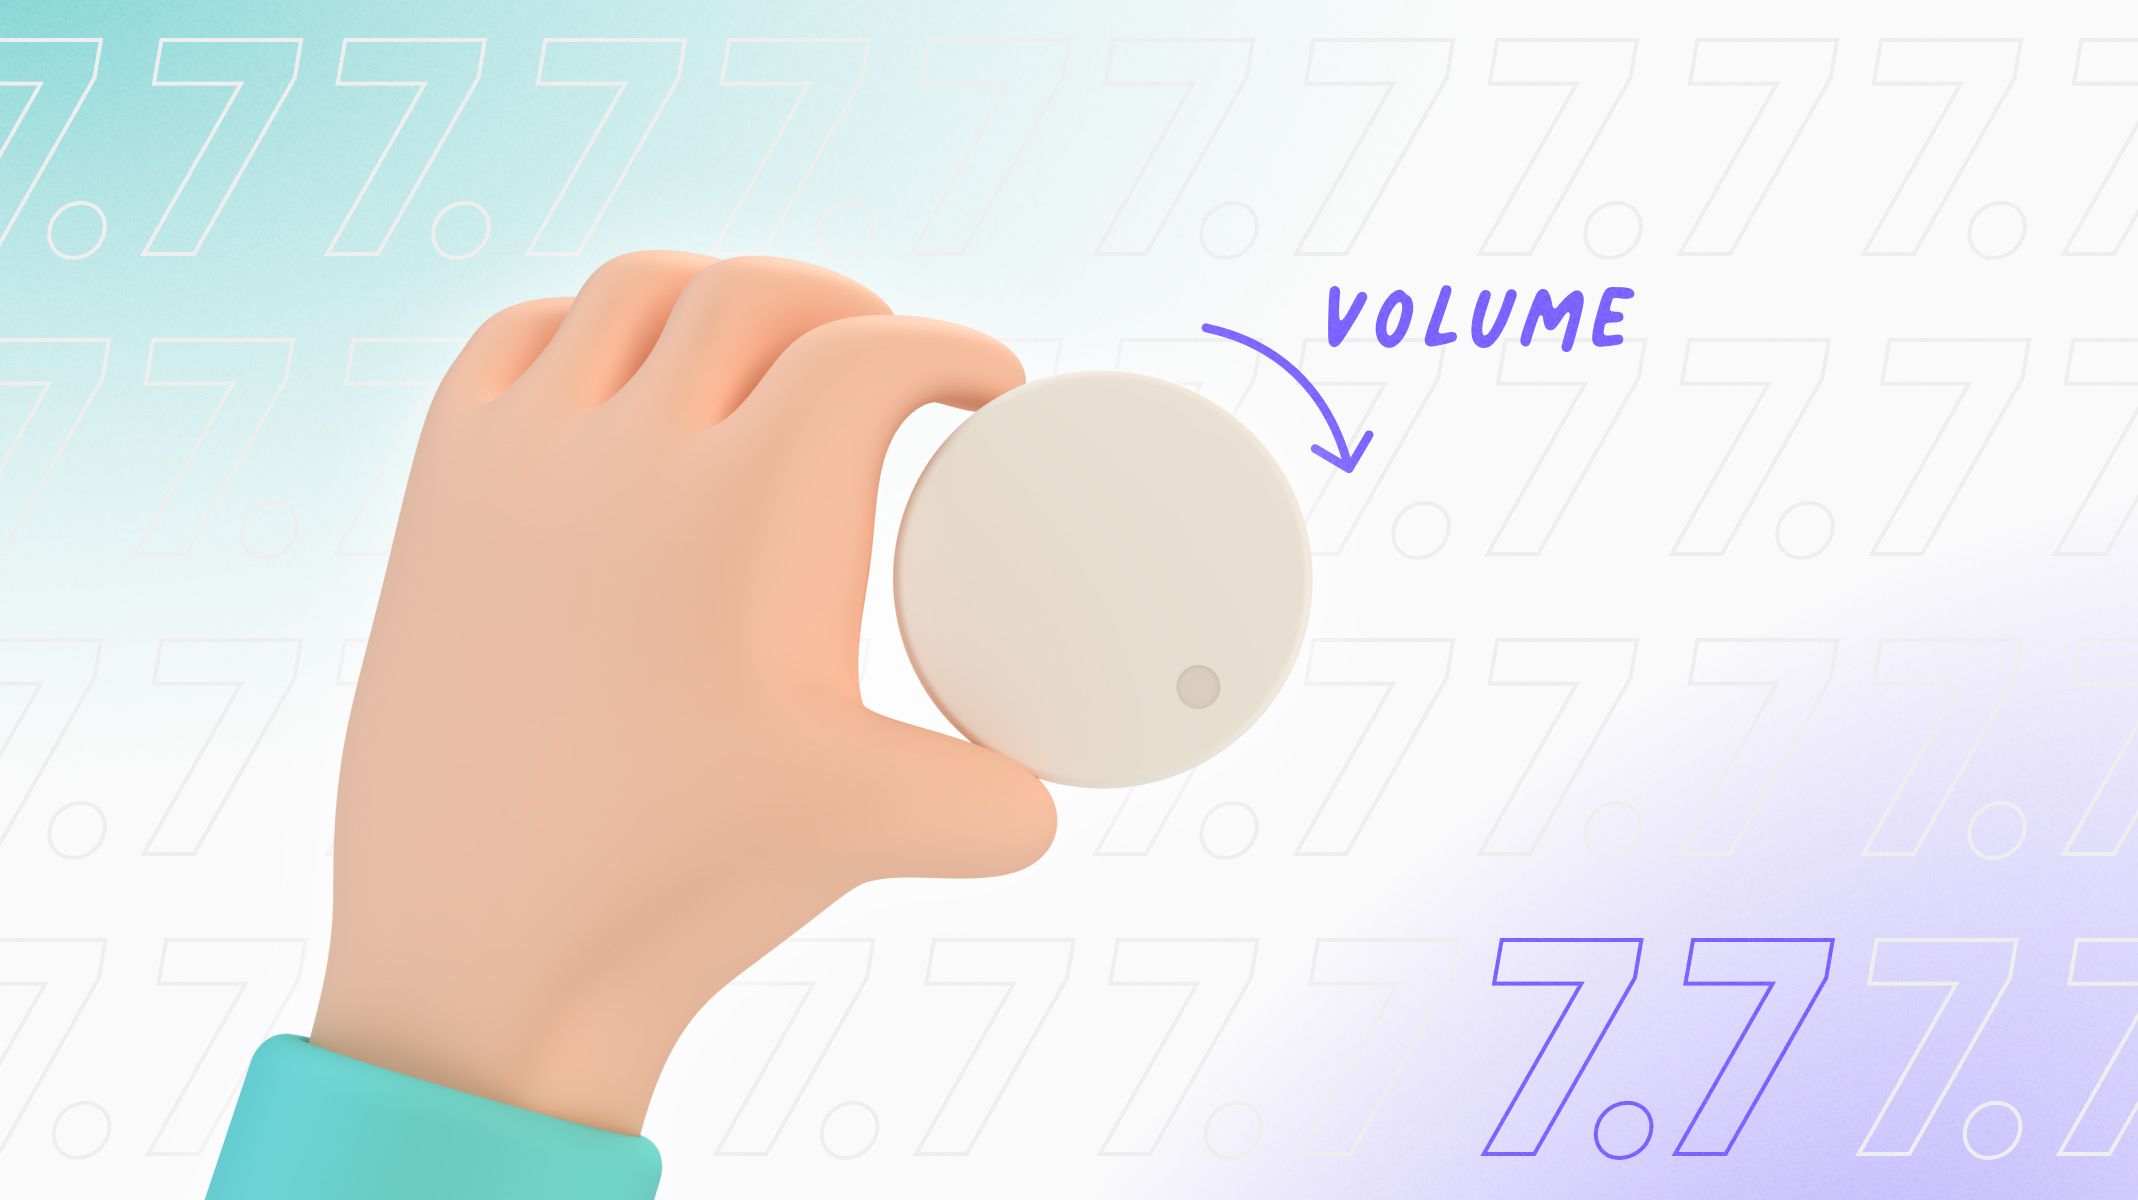 3D illustration of a hand turning a volume knob 